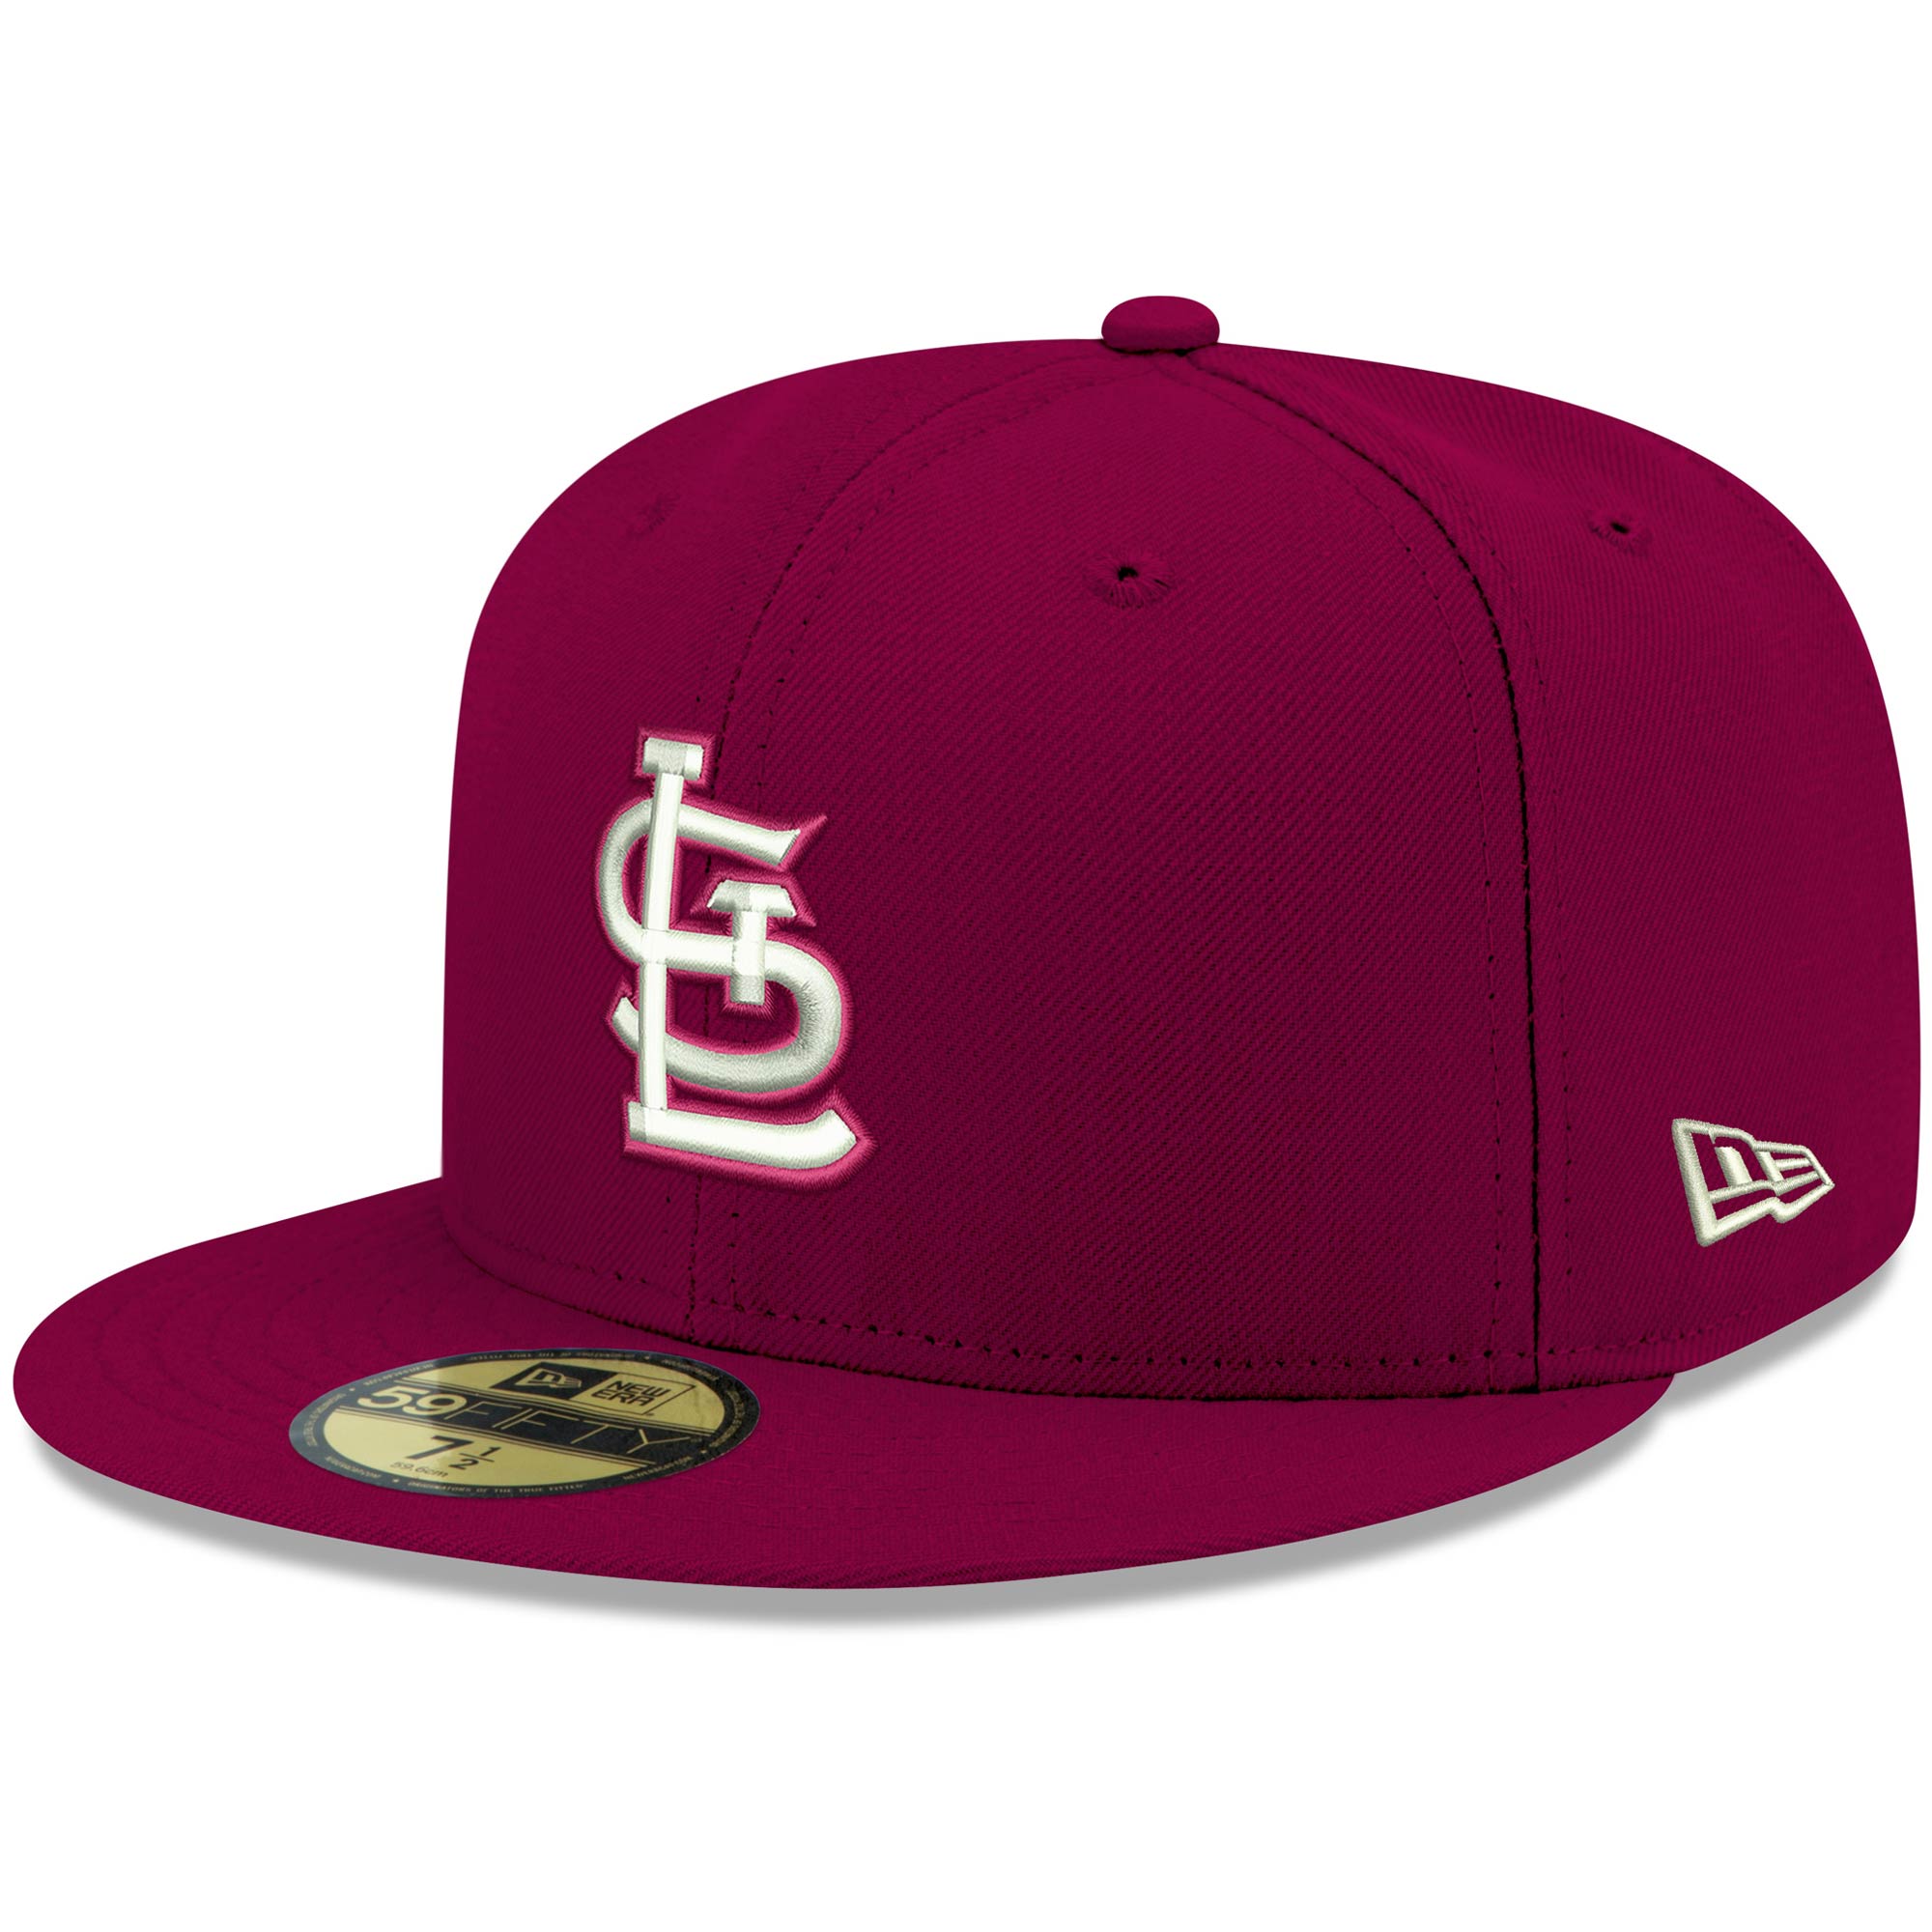 Men's St. Louis Cardinals New Era White/Red Undervisor 59FIFTY